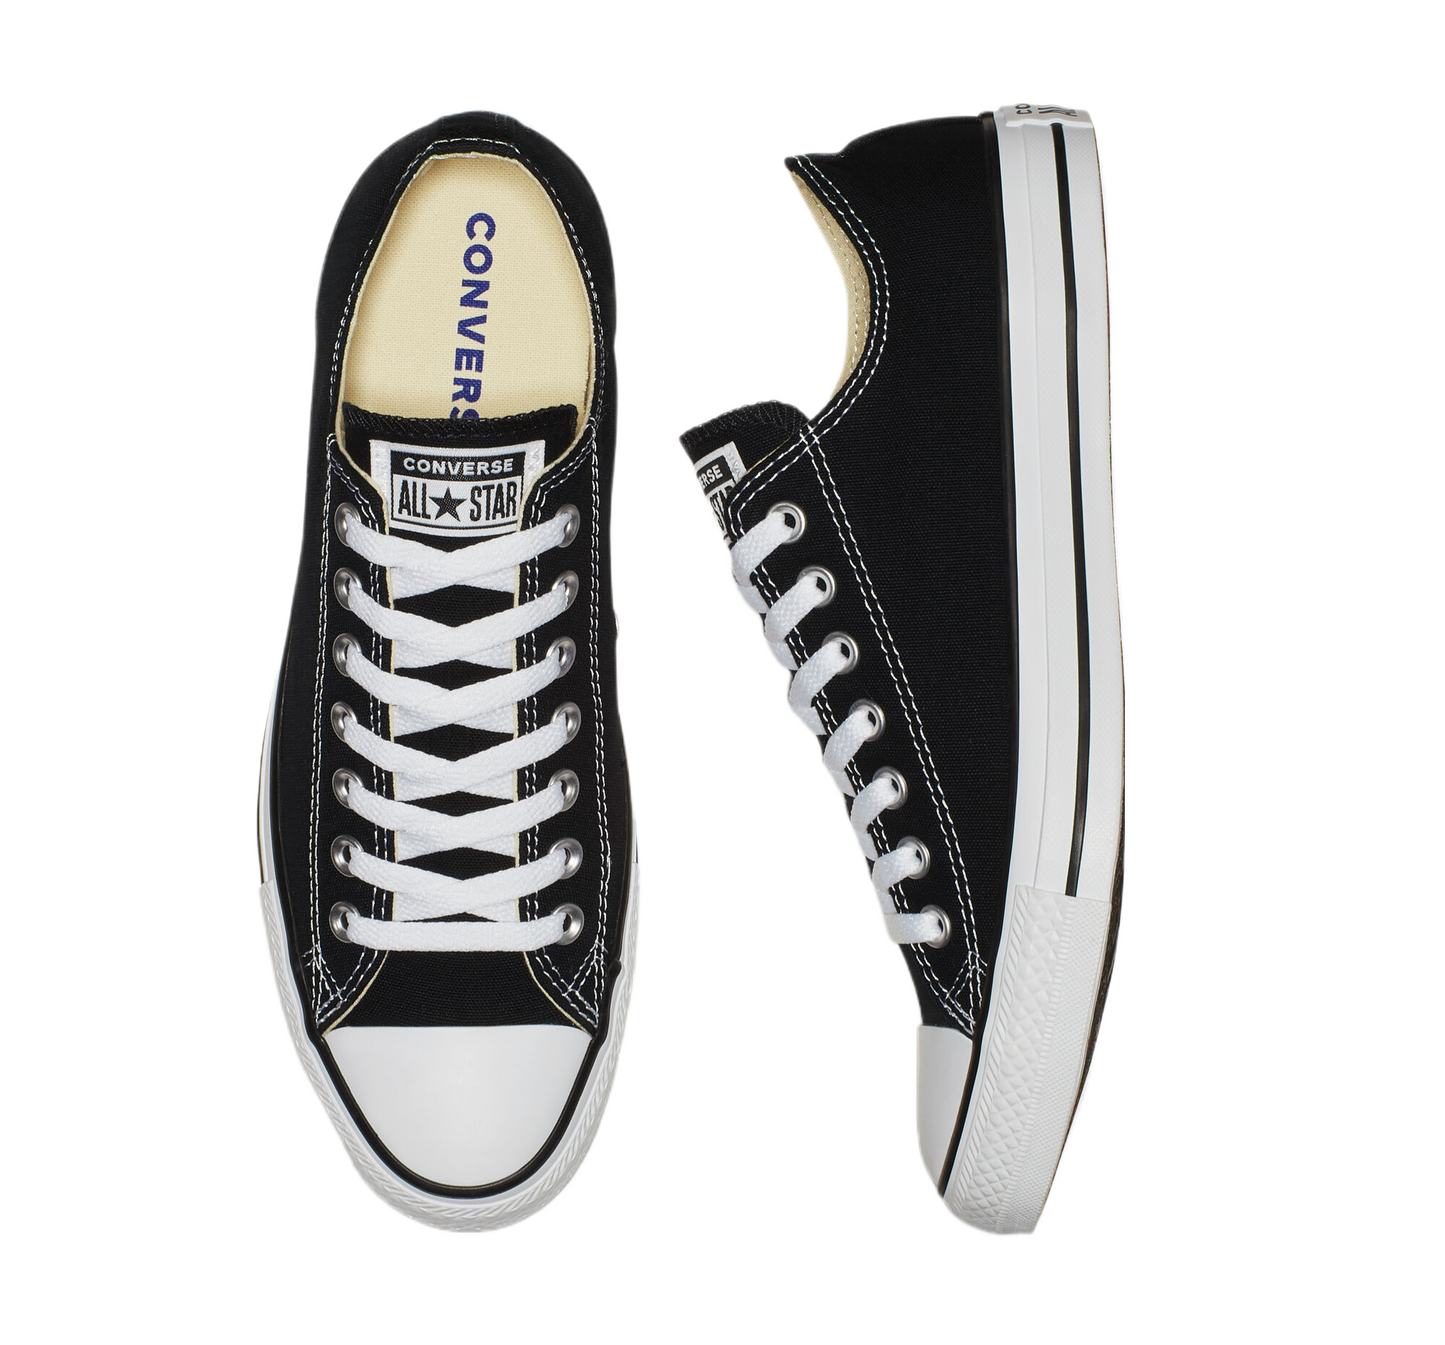 Converse Adult Chuck Taylor All Star Classic Low Top Black M9166 / M9166C